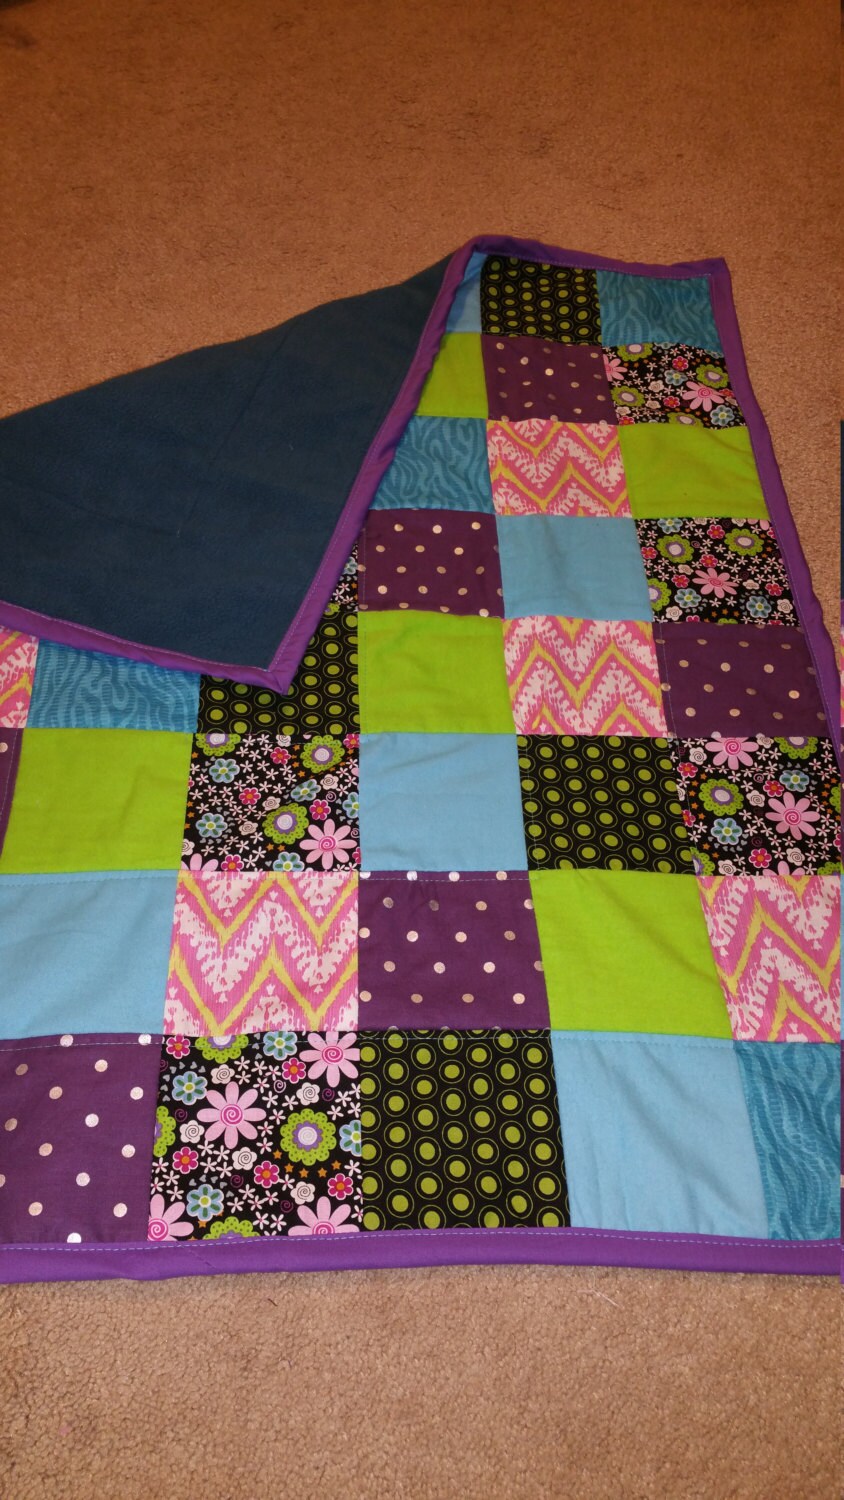 flower baby quilt http://etsy.me/1rCdQul by lisaleeasquilt on Etsy